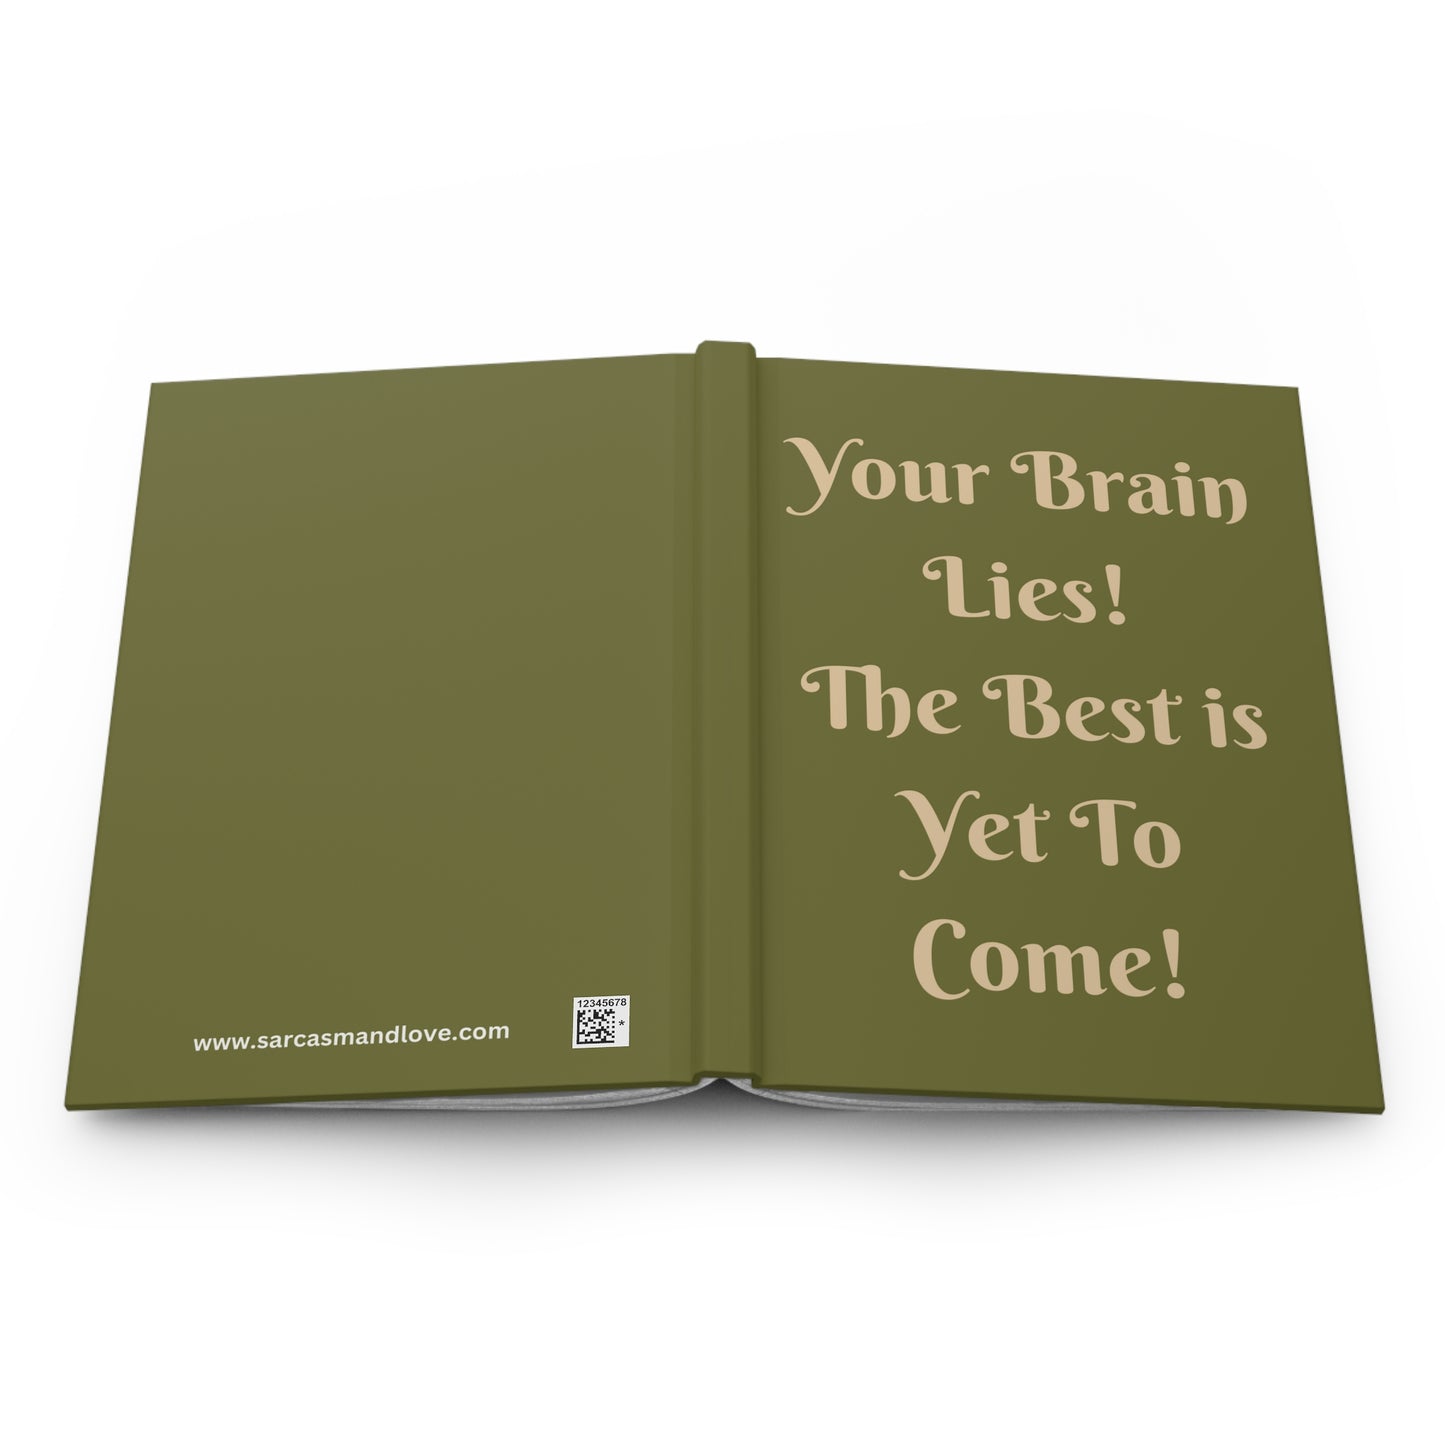 Your Brain Lies Hard Cover Journal - Best Yet to Come, Daily Wellness Notebook, Gratitude & Mindfulness, Affirmations, Self Care, 5.75"x7.5"